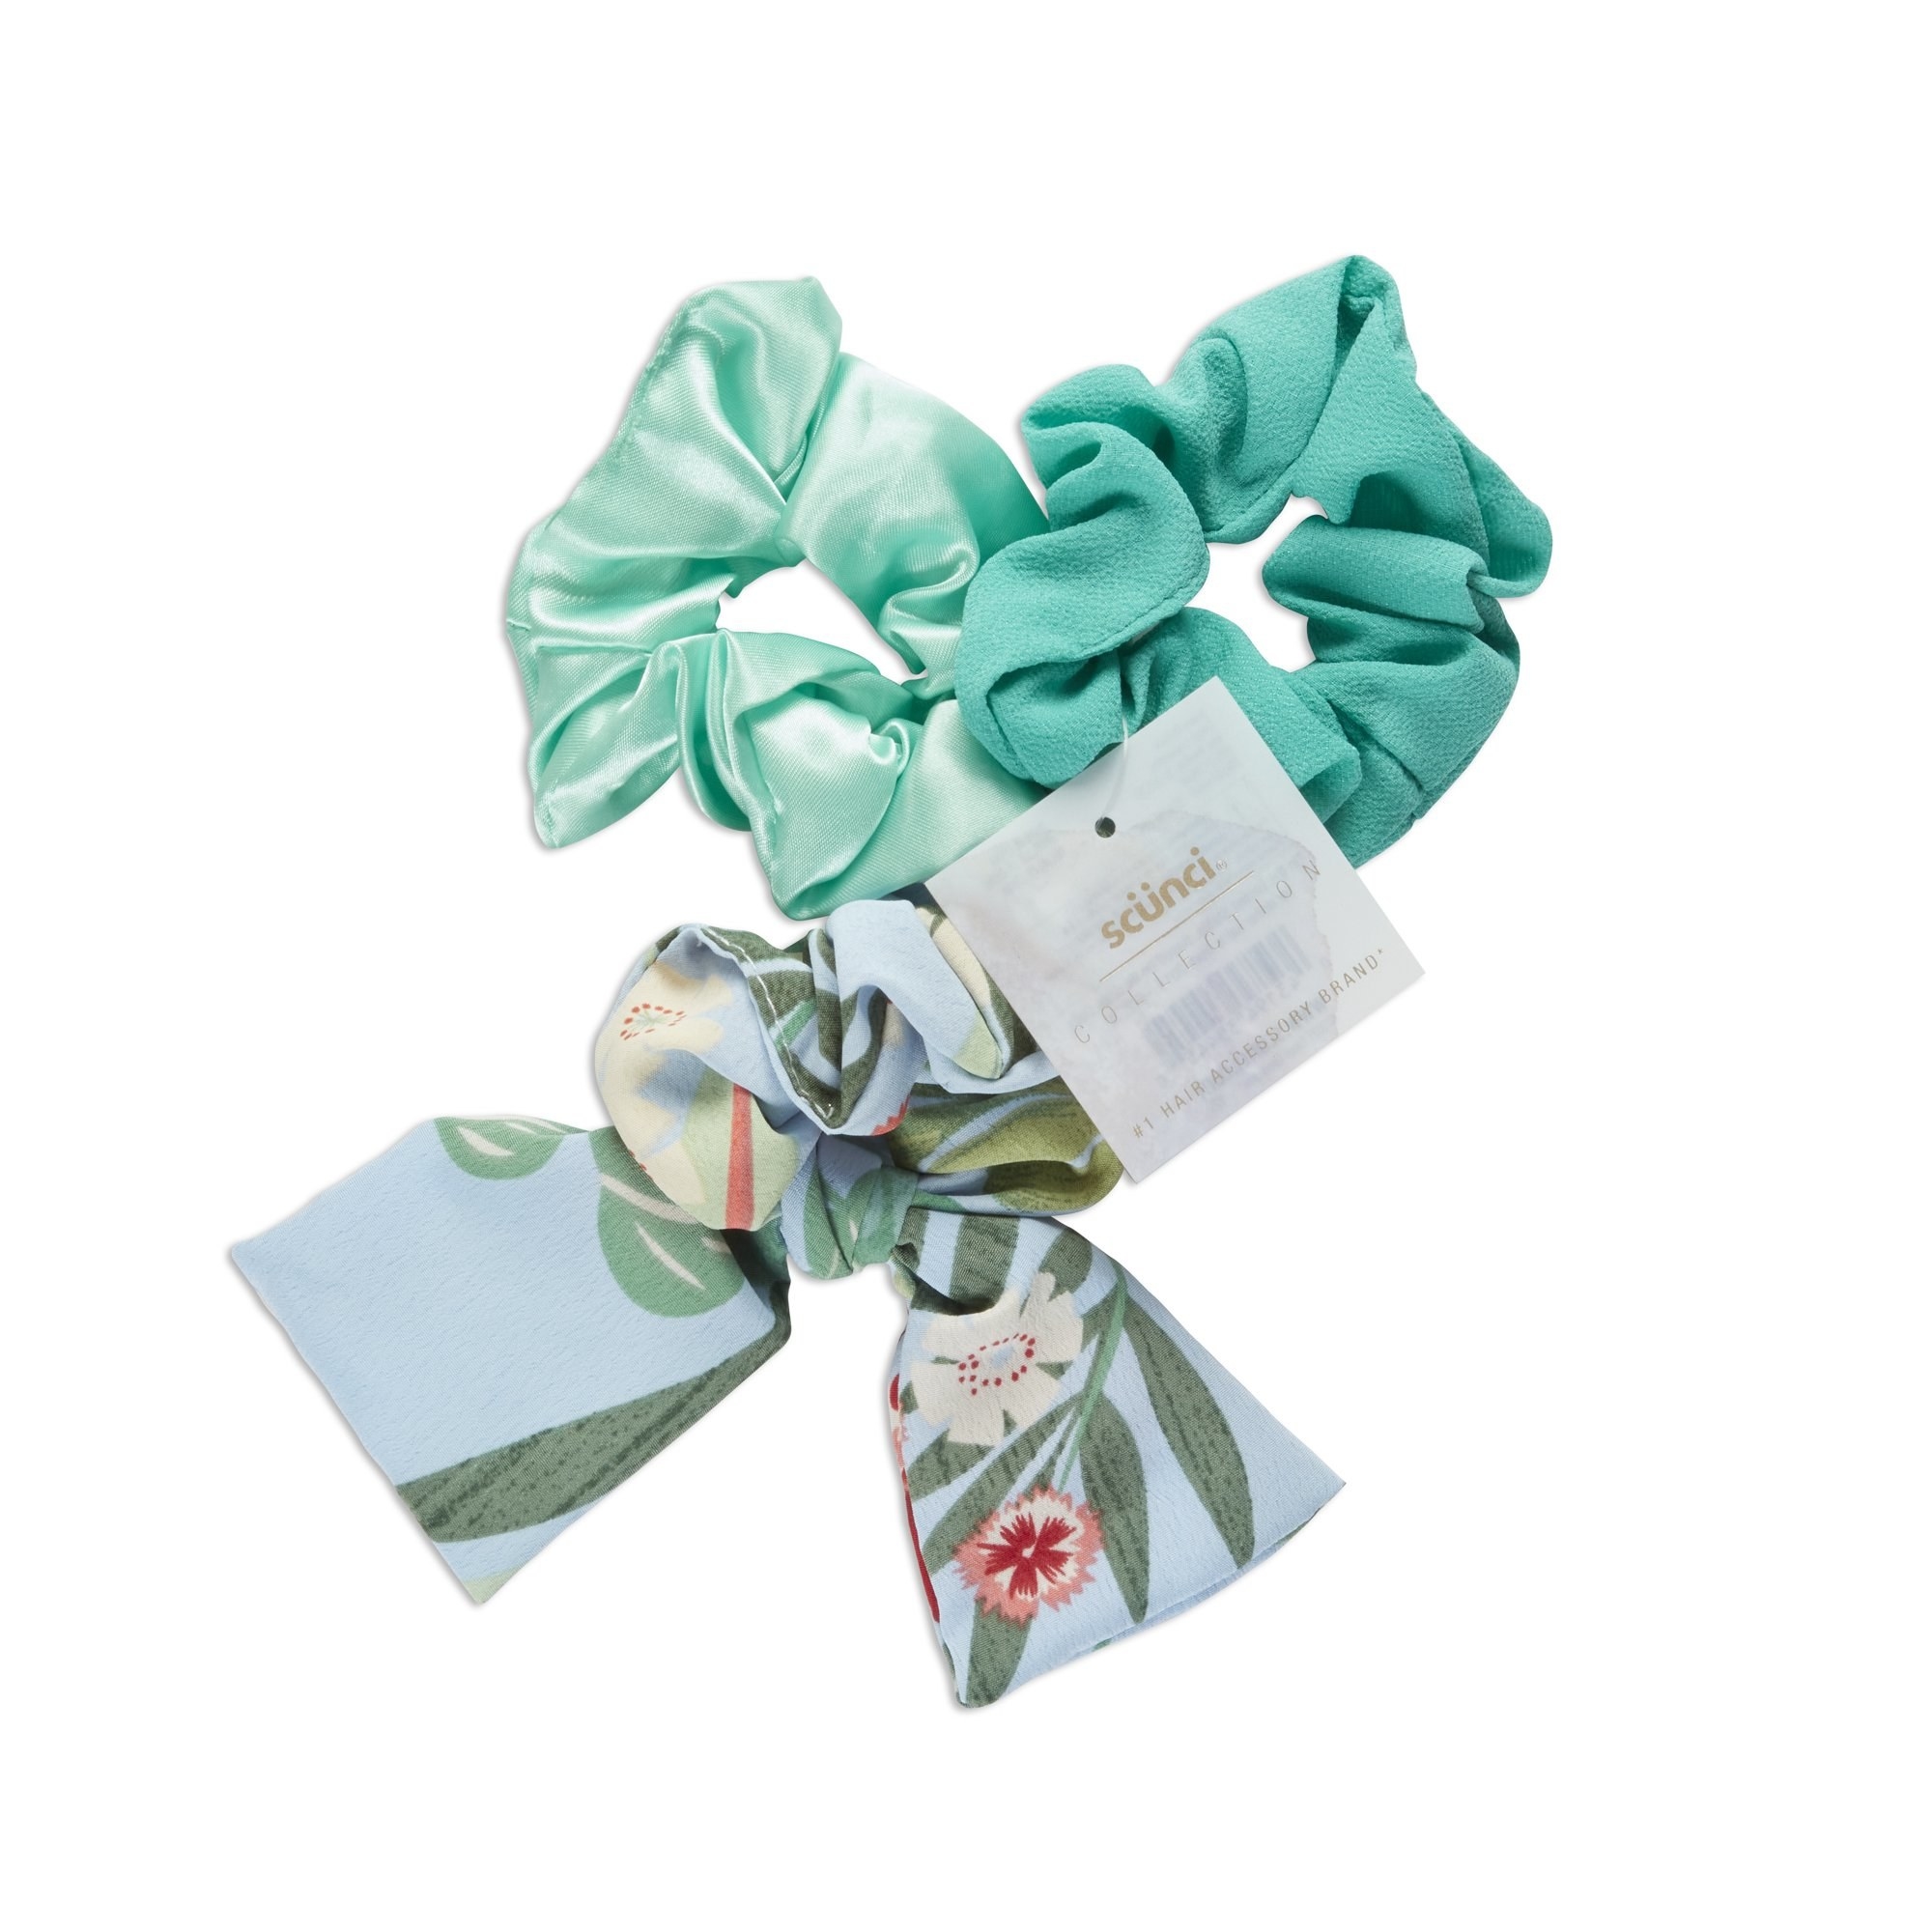 A pack of mint-colored scrunchies